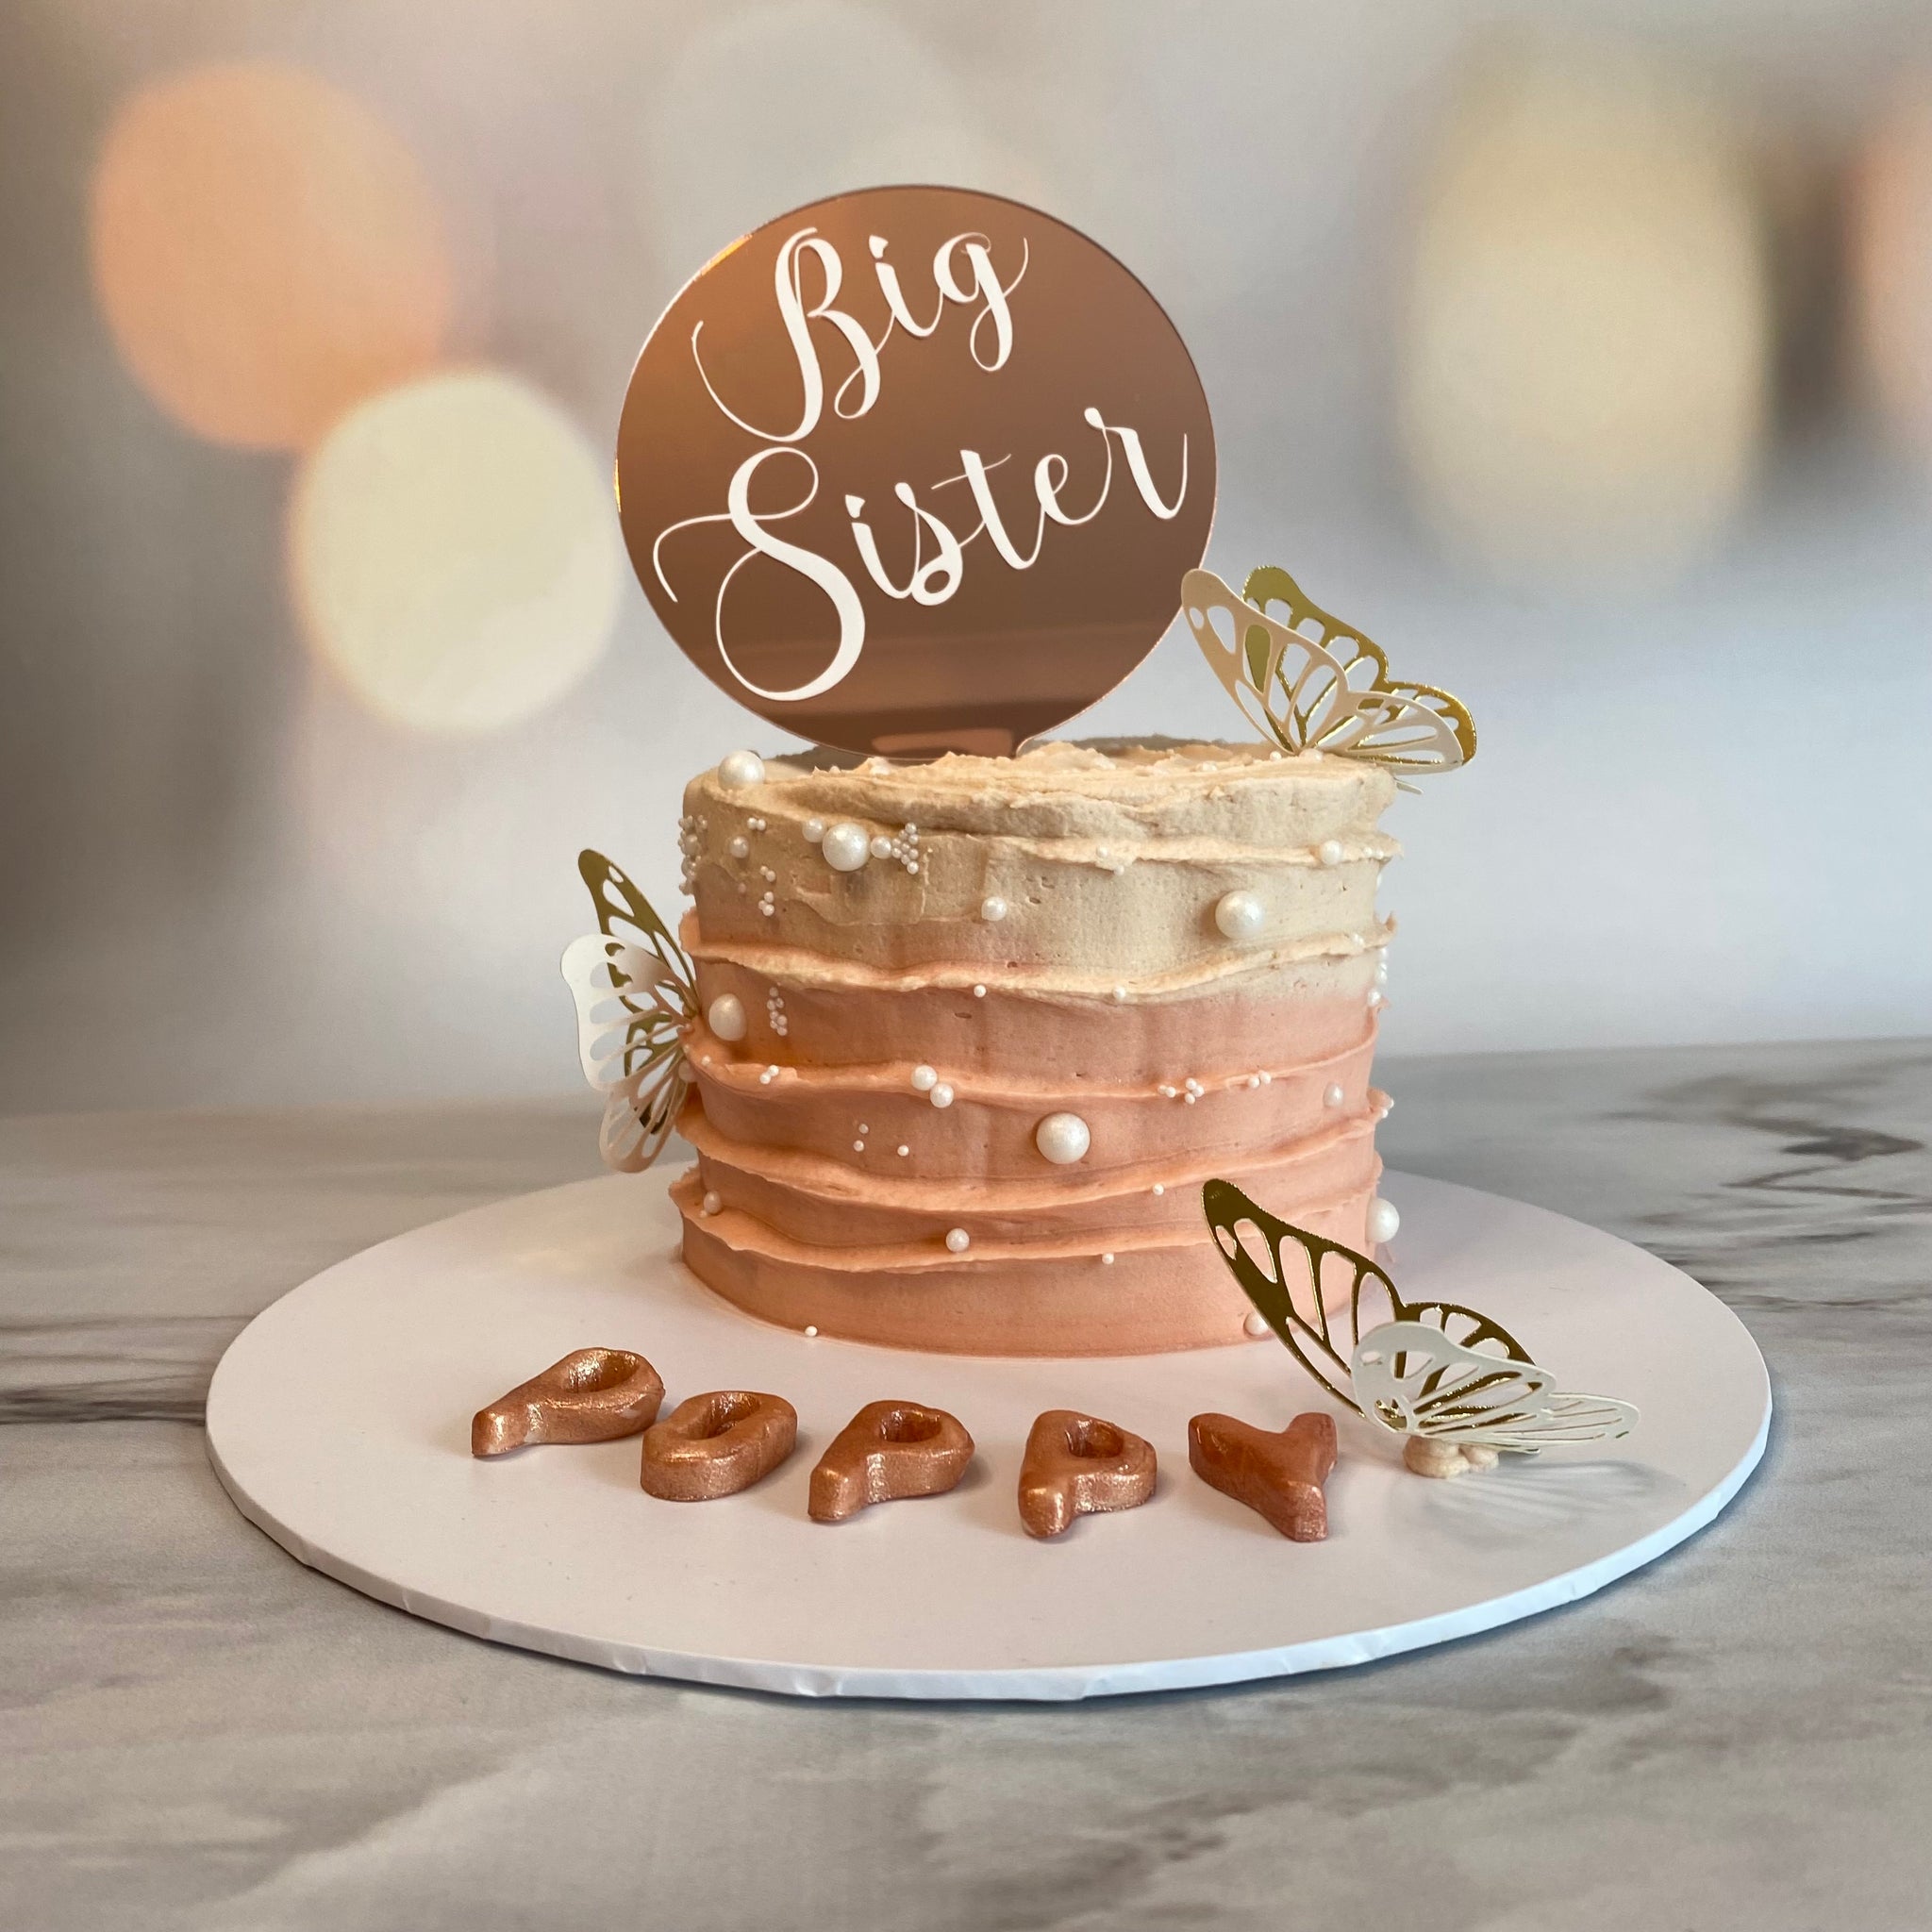 Big Sister/Brother Cake – Eat With Etiquette